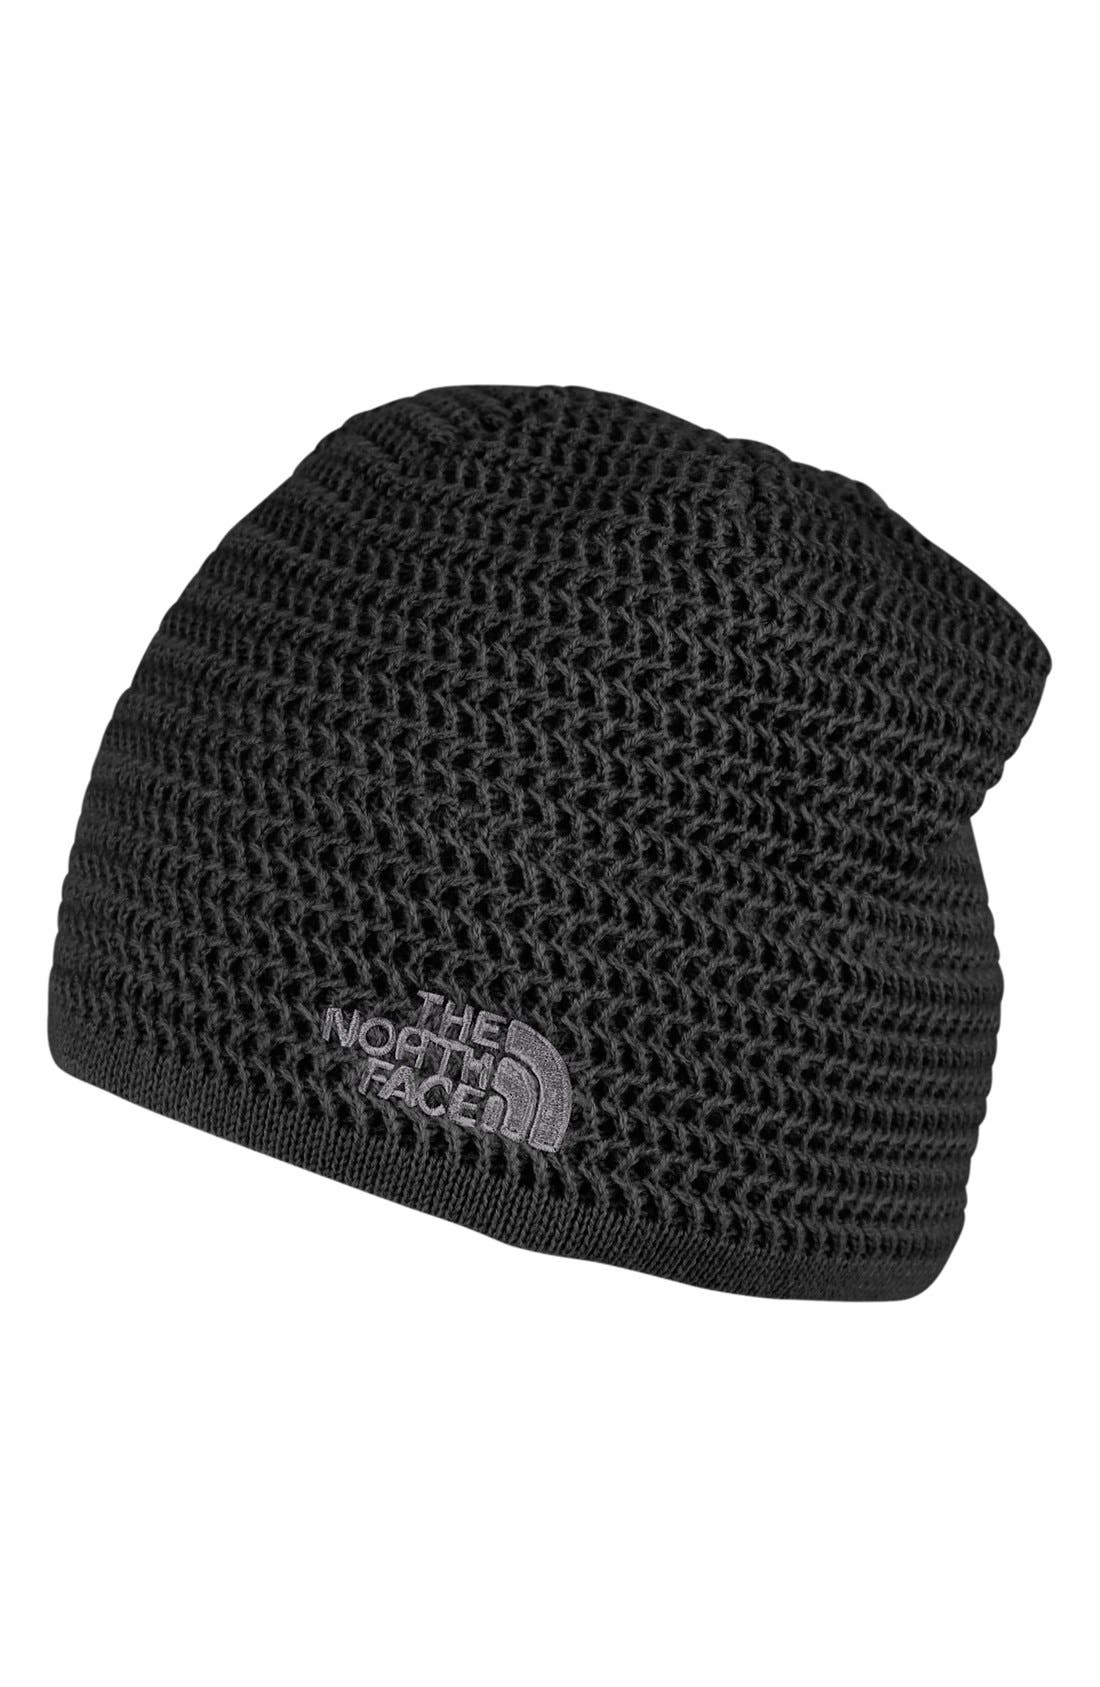 The North Face 'Wicked' Beanie | Nordstrom